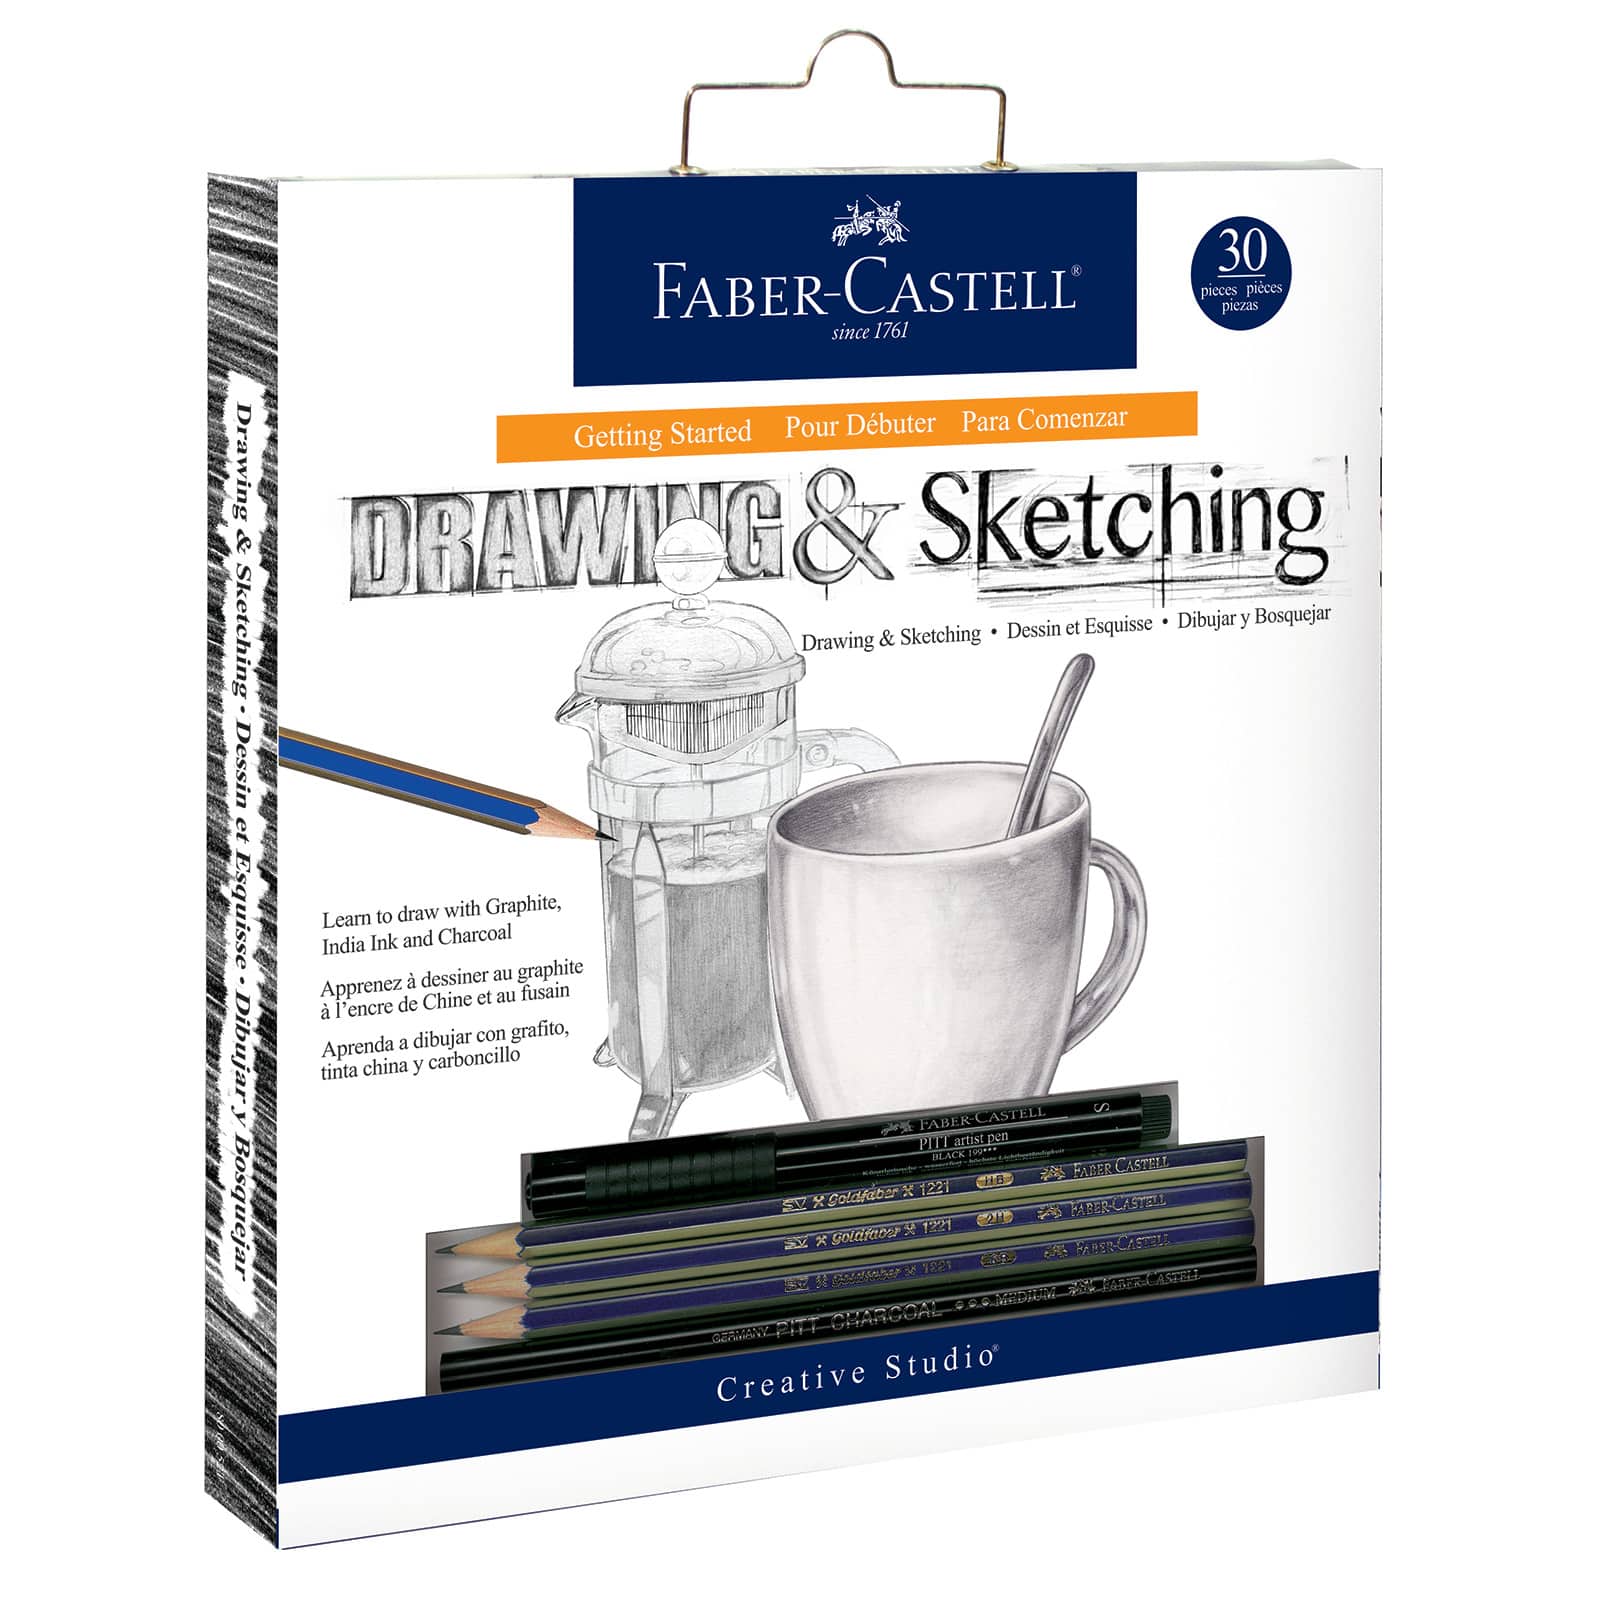 Faber-Castell&#xAE; Creative Studio&#xAE; Getting Started Drawing &#x26; Sketching Set